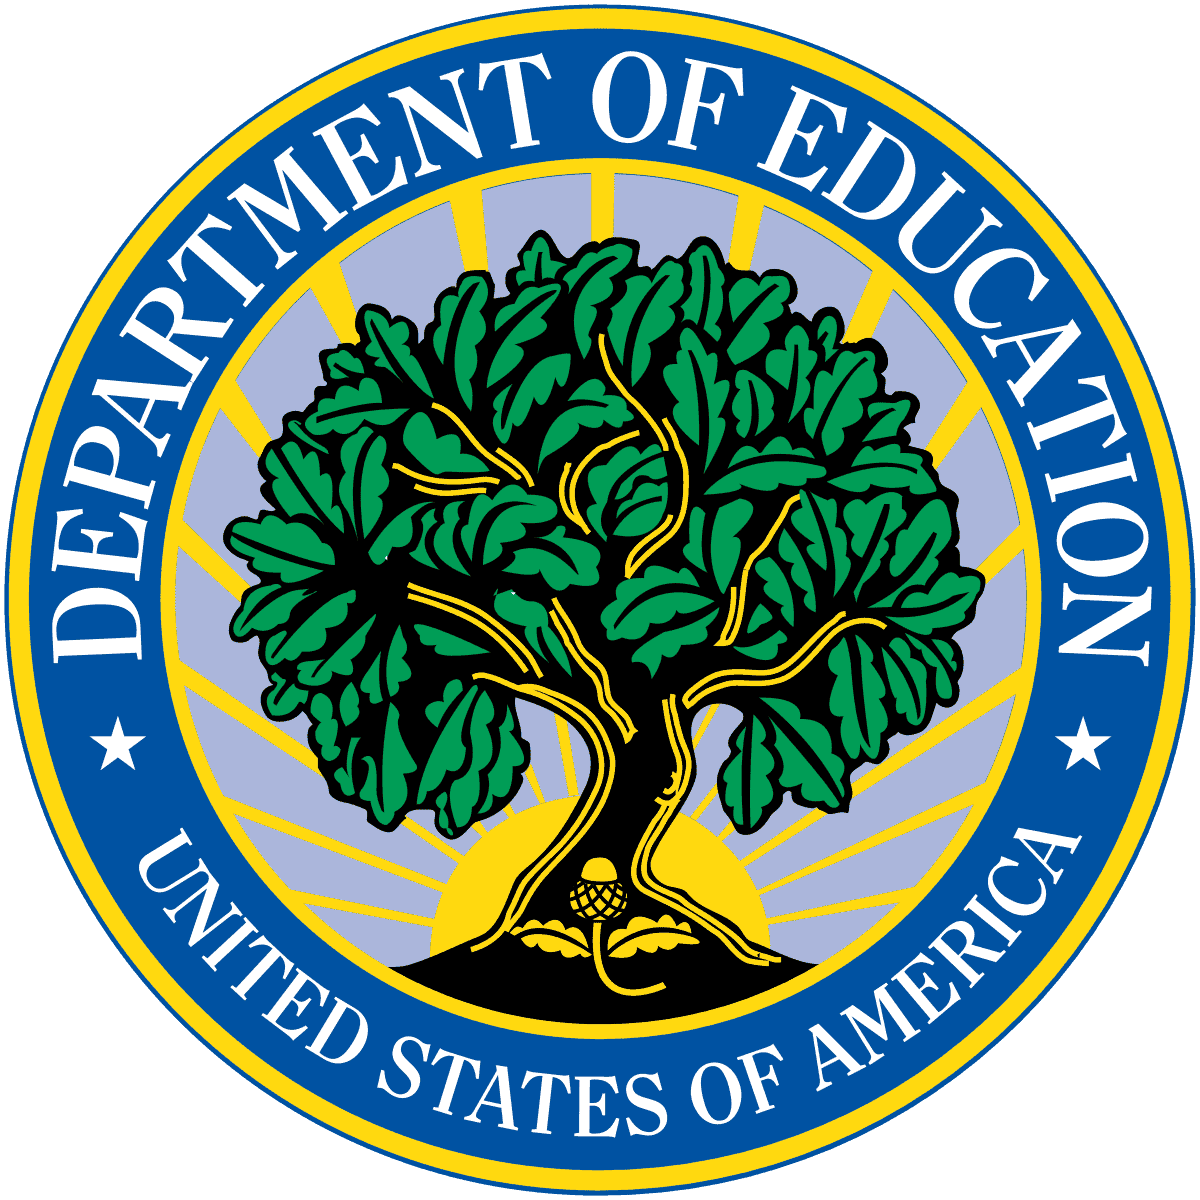 Comments in Response to Department of Education's Proposed Rulemaking: Title  IX of the Education Amendments of 1972 - New Civil Liberties Alliance